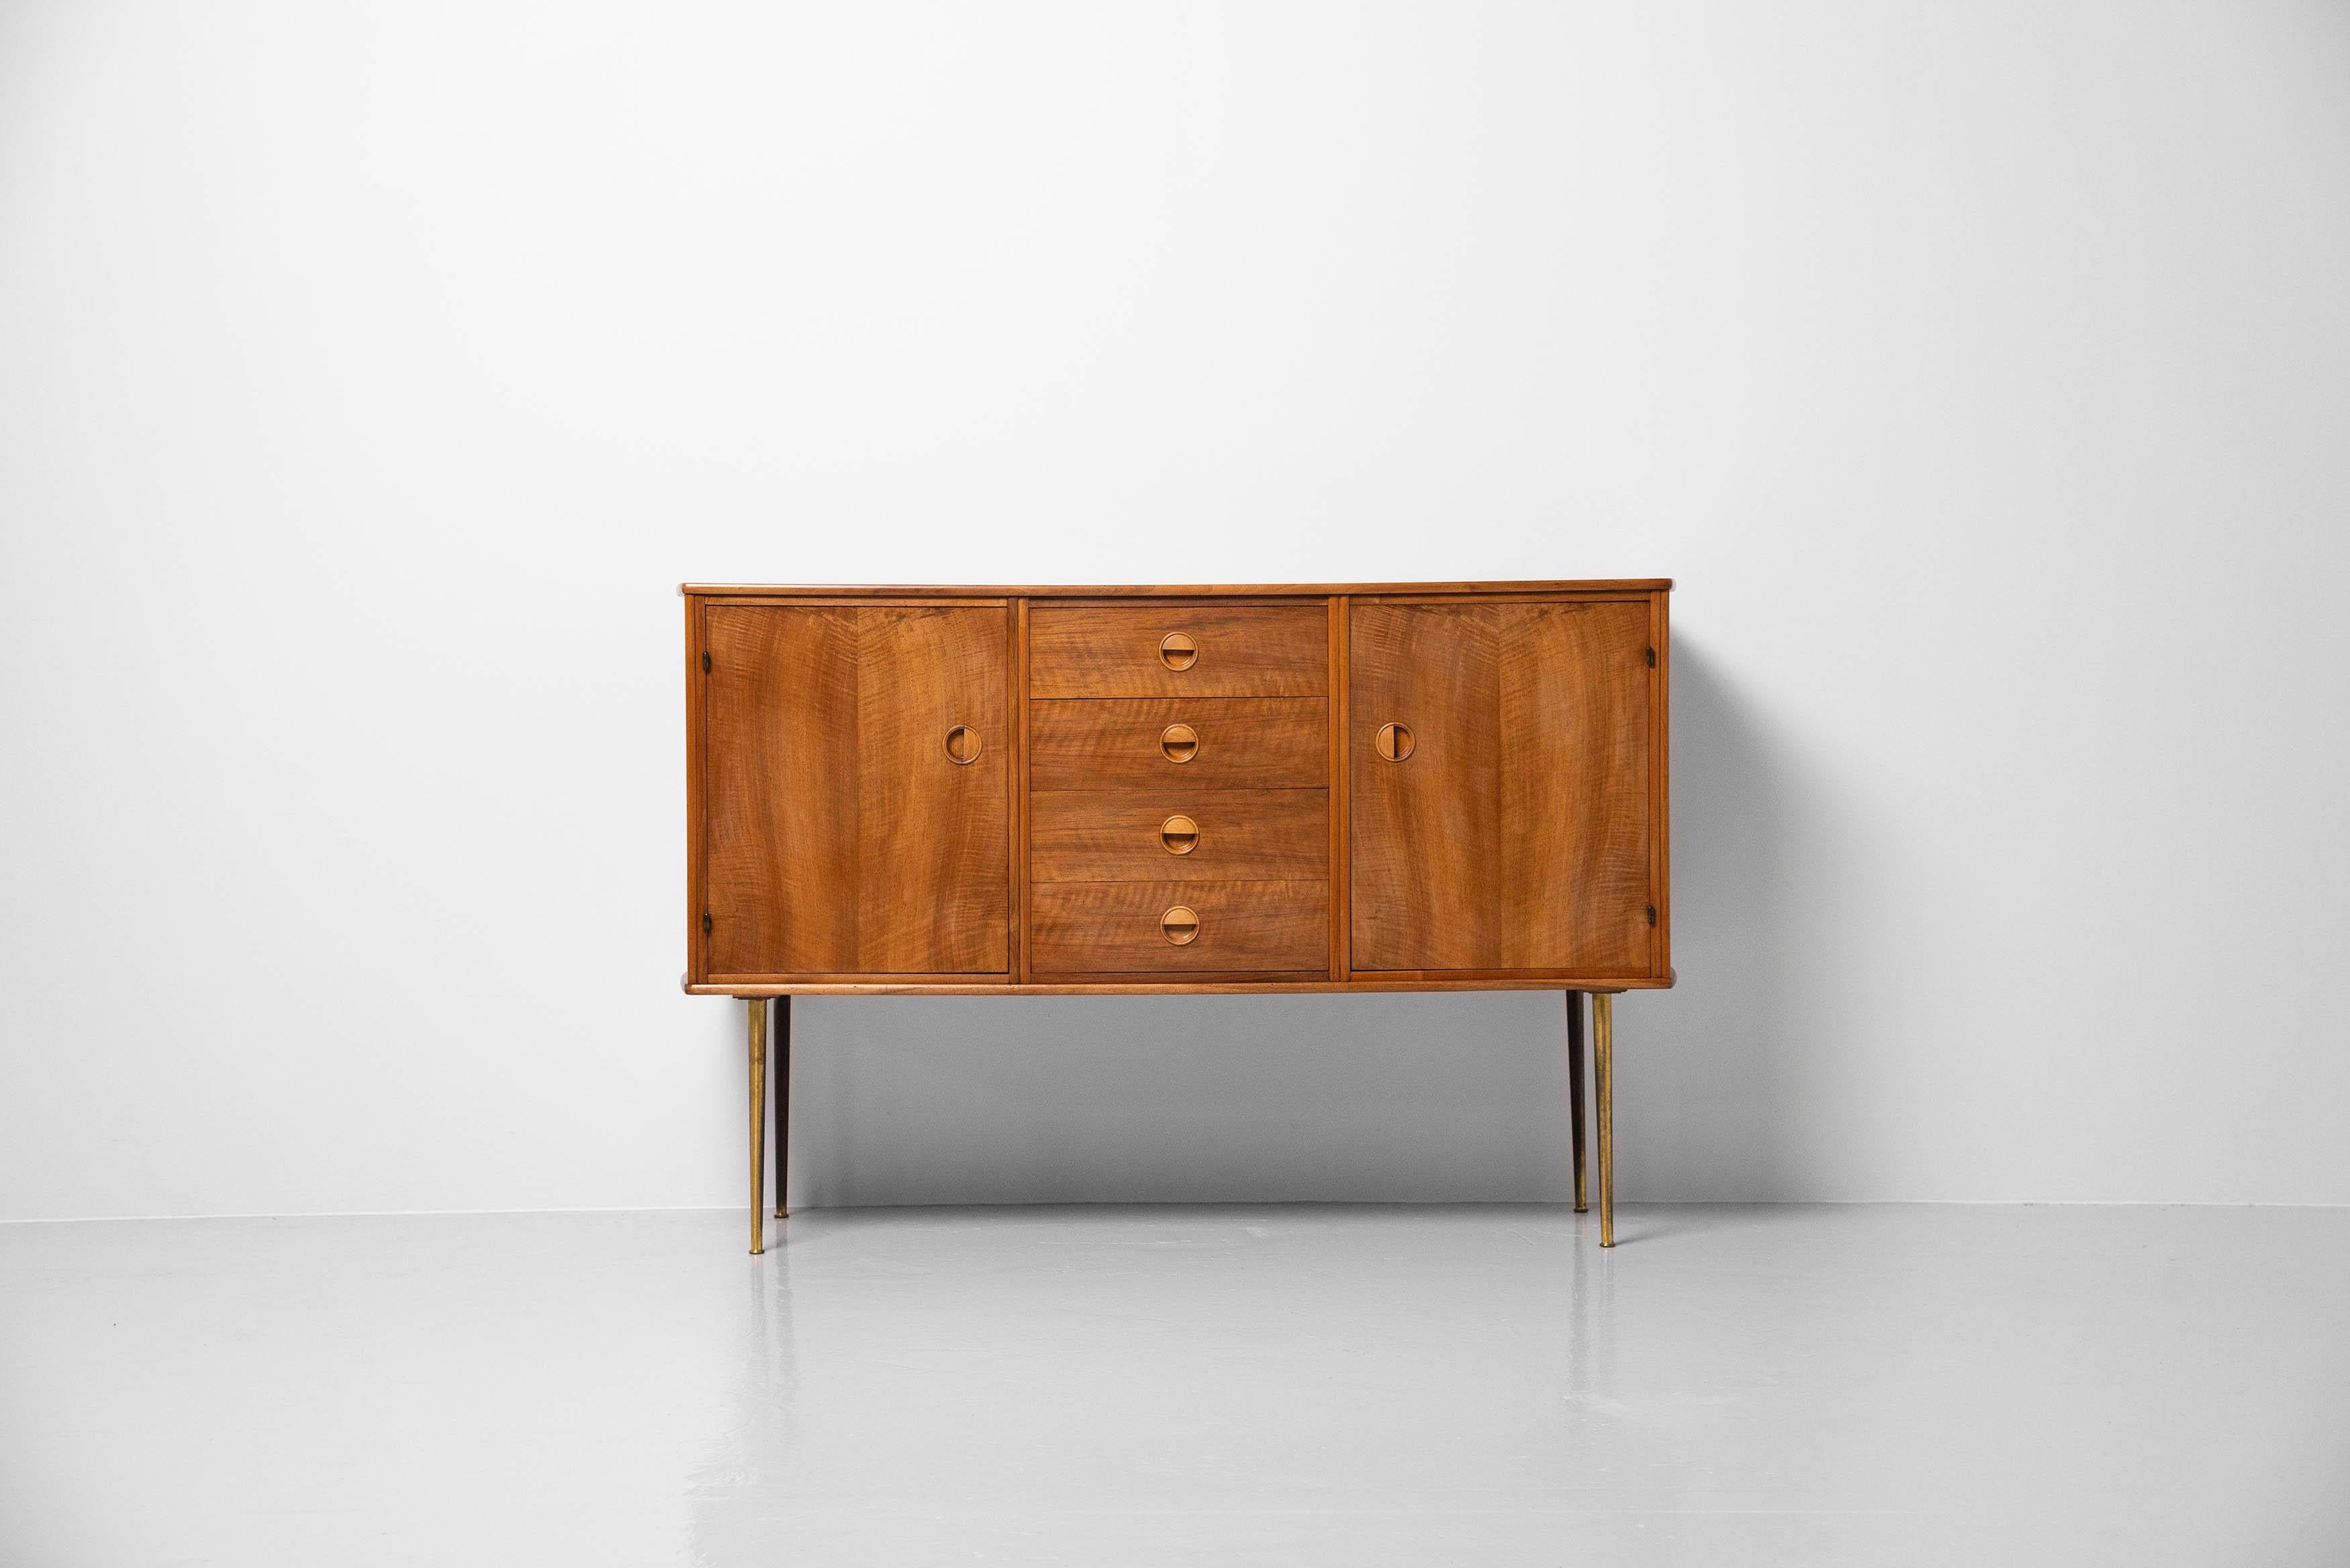 Very nice small and unusual high credenza designed by William Watting and and manufactured by Fristho Modernord, Holland 1956. This quality credenza has 2 folding doors on the left and right with a shelve behind and in the middle there are 4